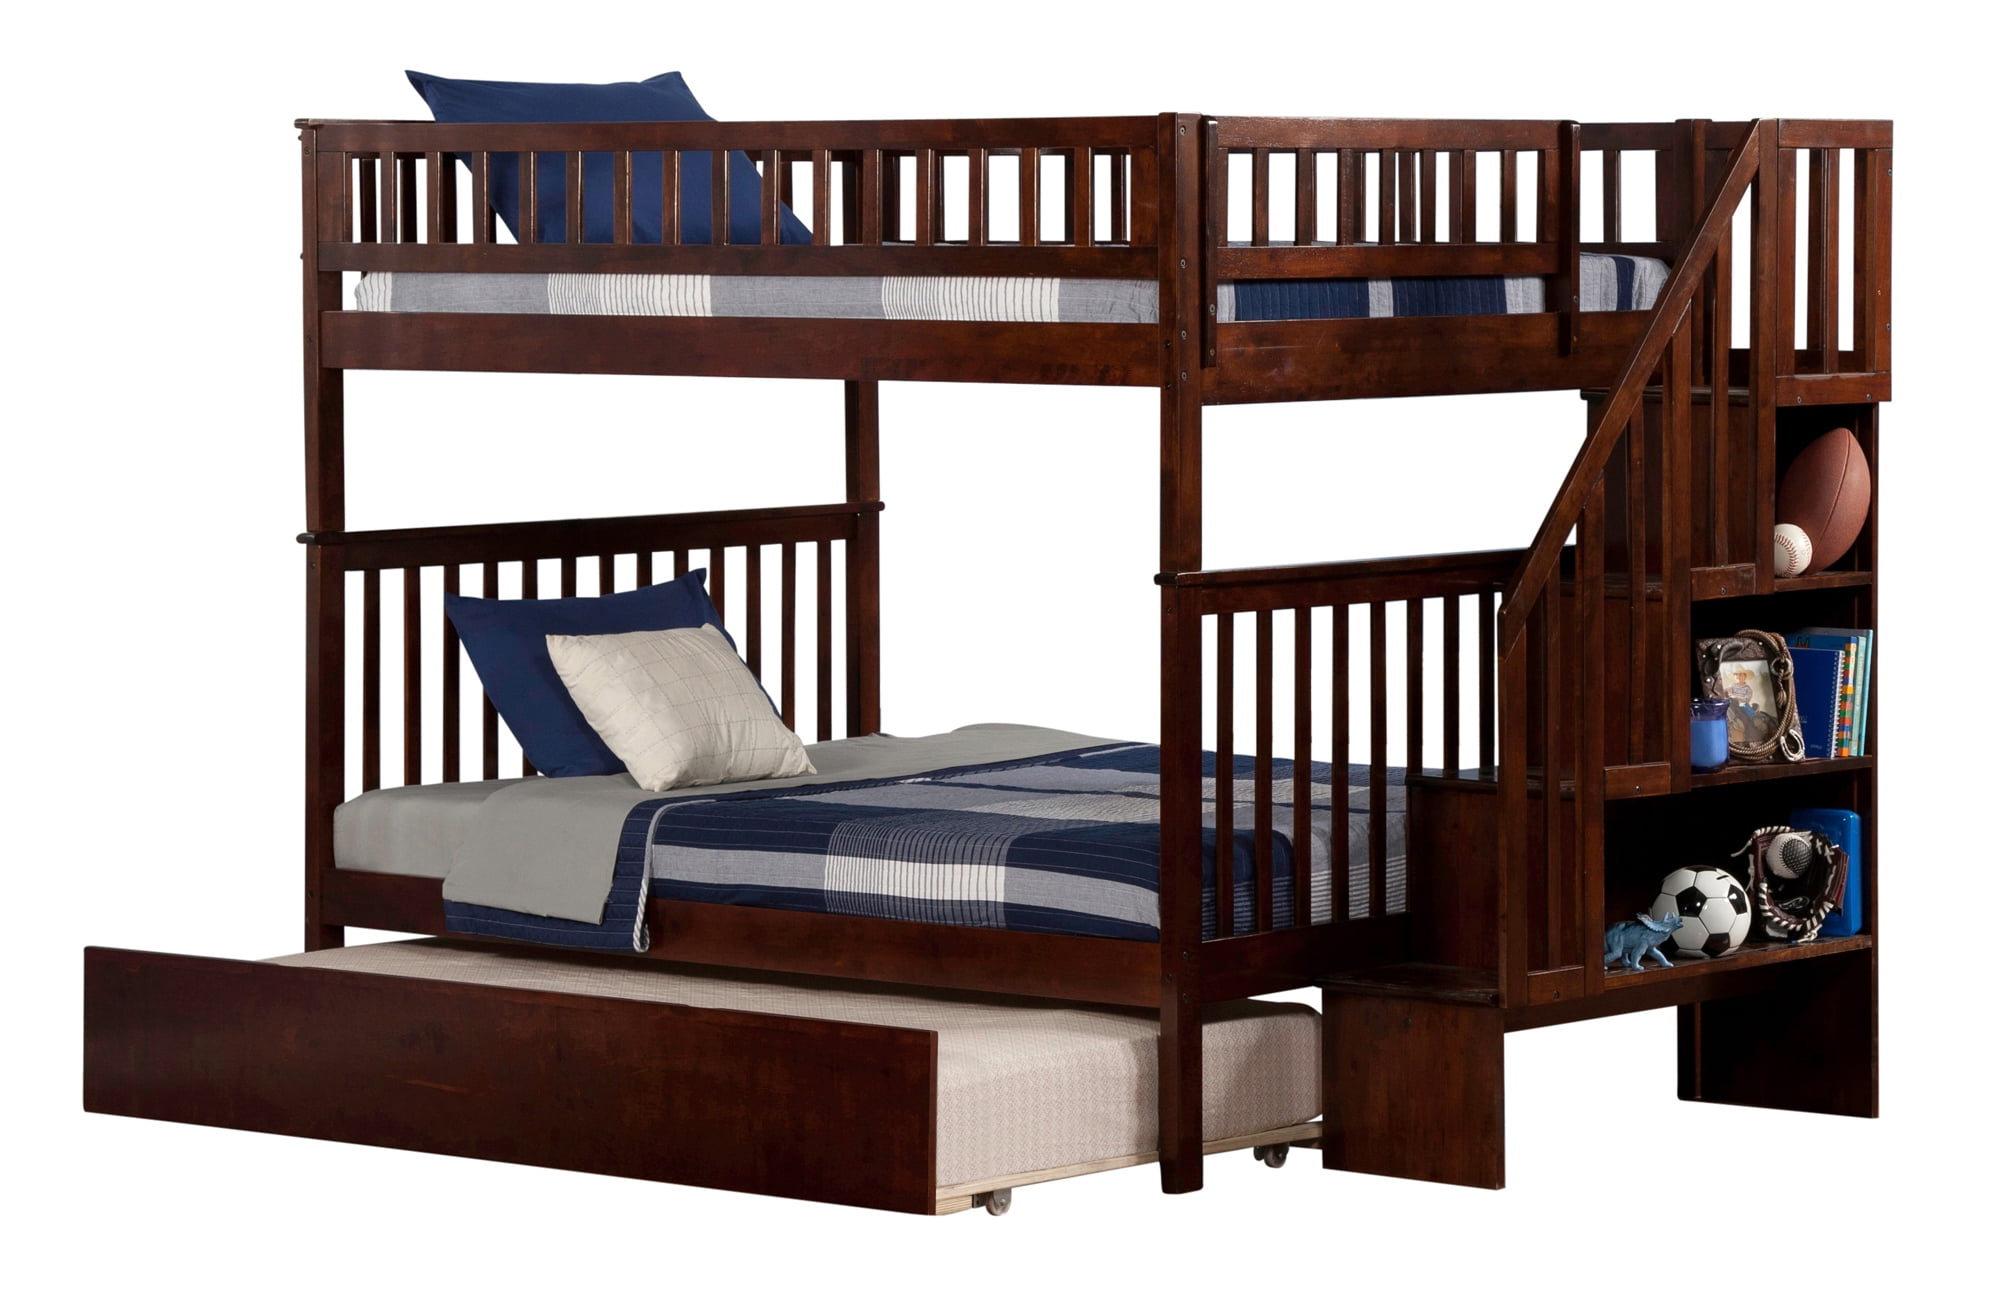 Atlantic AB56854 Woodland Staircase Bunk Bed with Urban Lifestyle Trundle, Antique Walnut - Full & Full